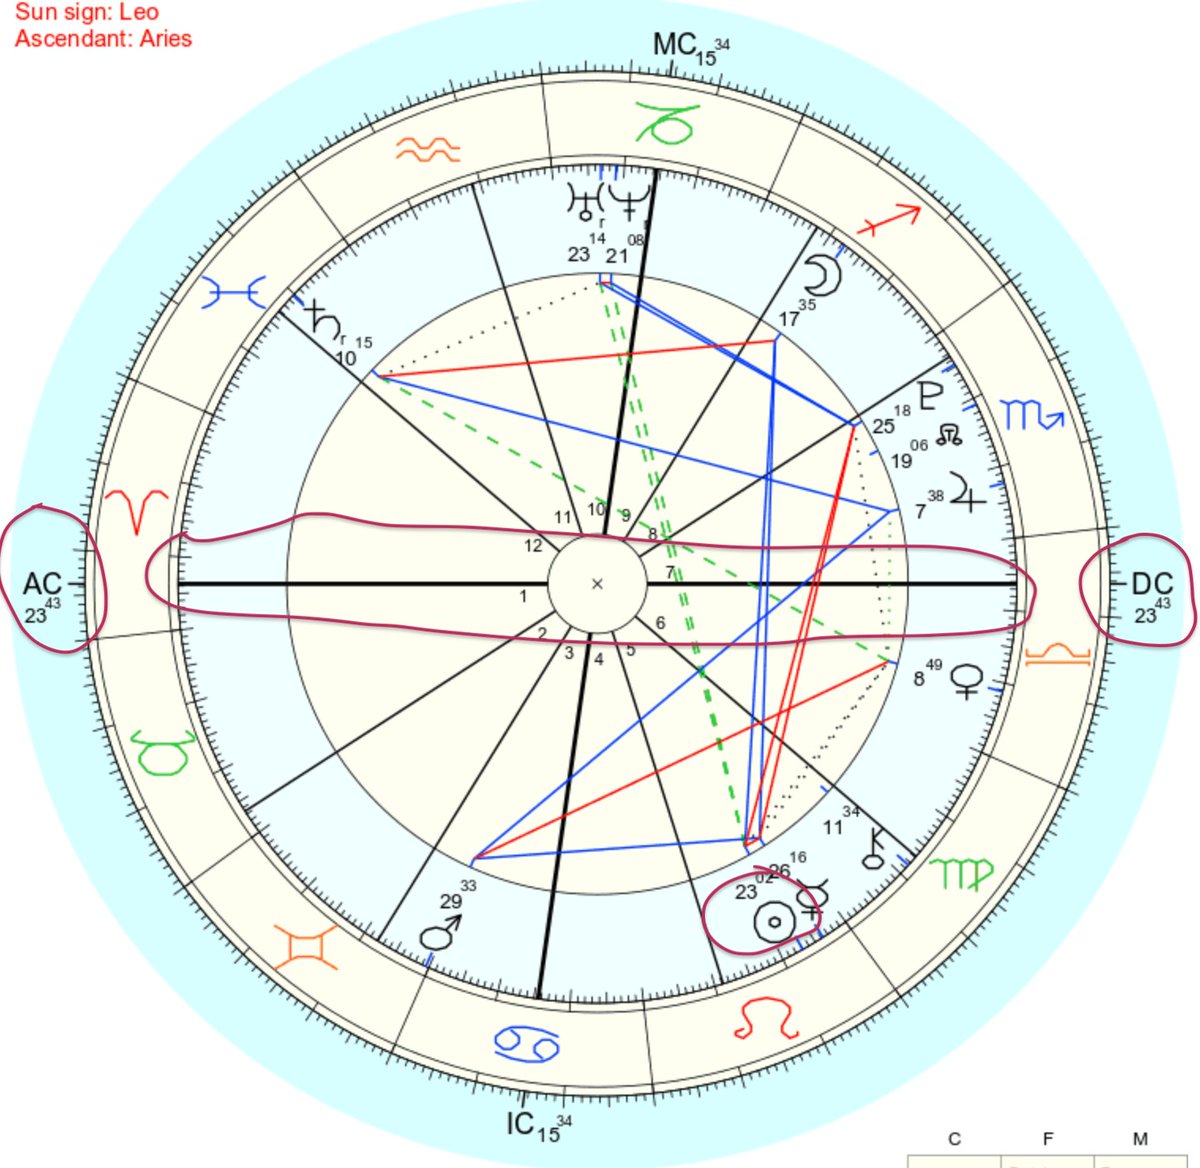 When you have your natal wheel laid out in front of you, I want you to take notice of the bold line that has "AS" and "DC" on either side of it. (I've highlighted it in purple). Now find your sun (mine is circled at the bottom).